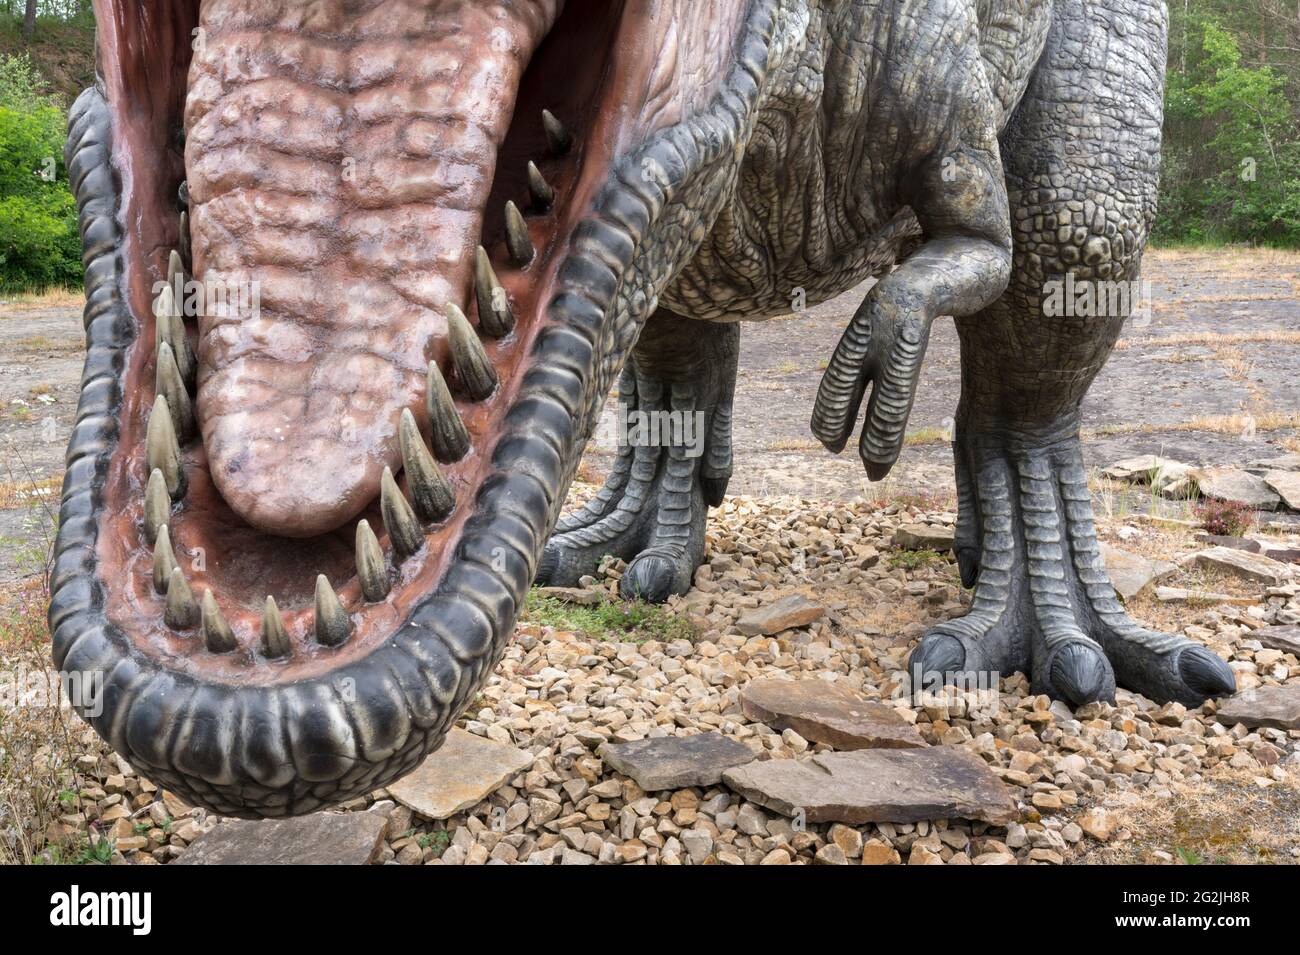 Dinosaur Tyrannosaurus as a model in Dinopark Münchehagen near Hanover. Lived in North America about 66 million years ago, was about 13m long and weighed 6t. Model: Wild Creations UK / Universal Pictures DE Stock Photo